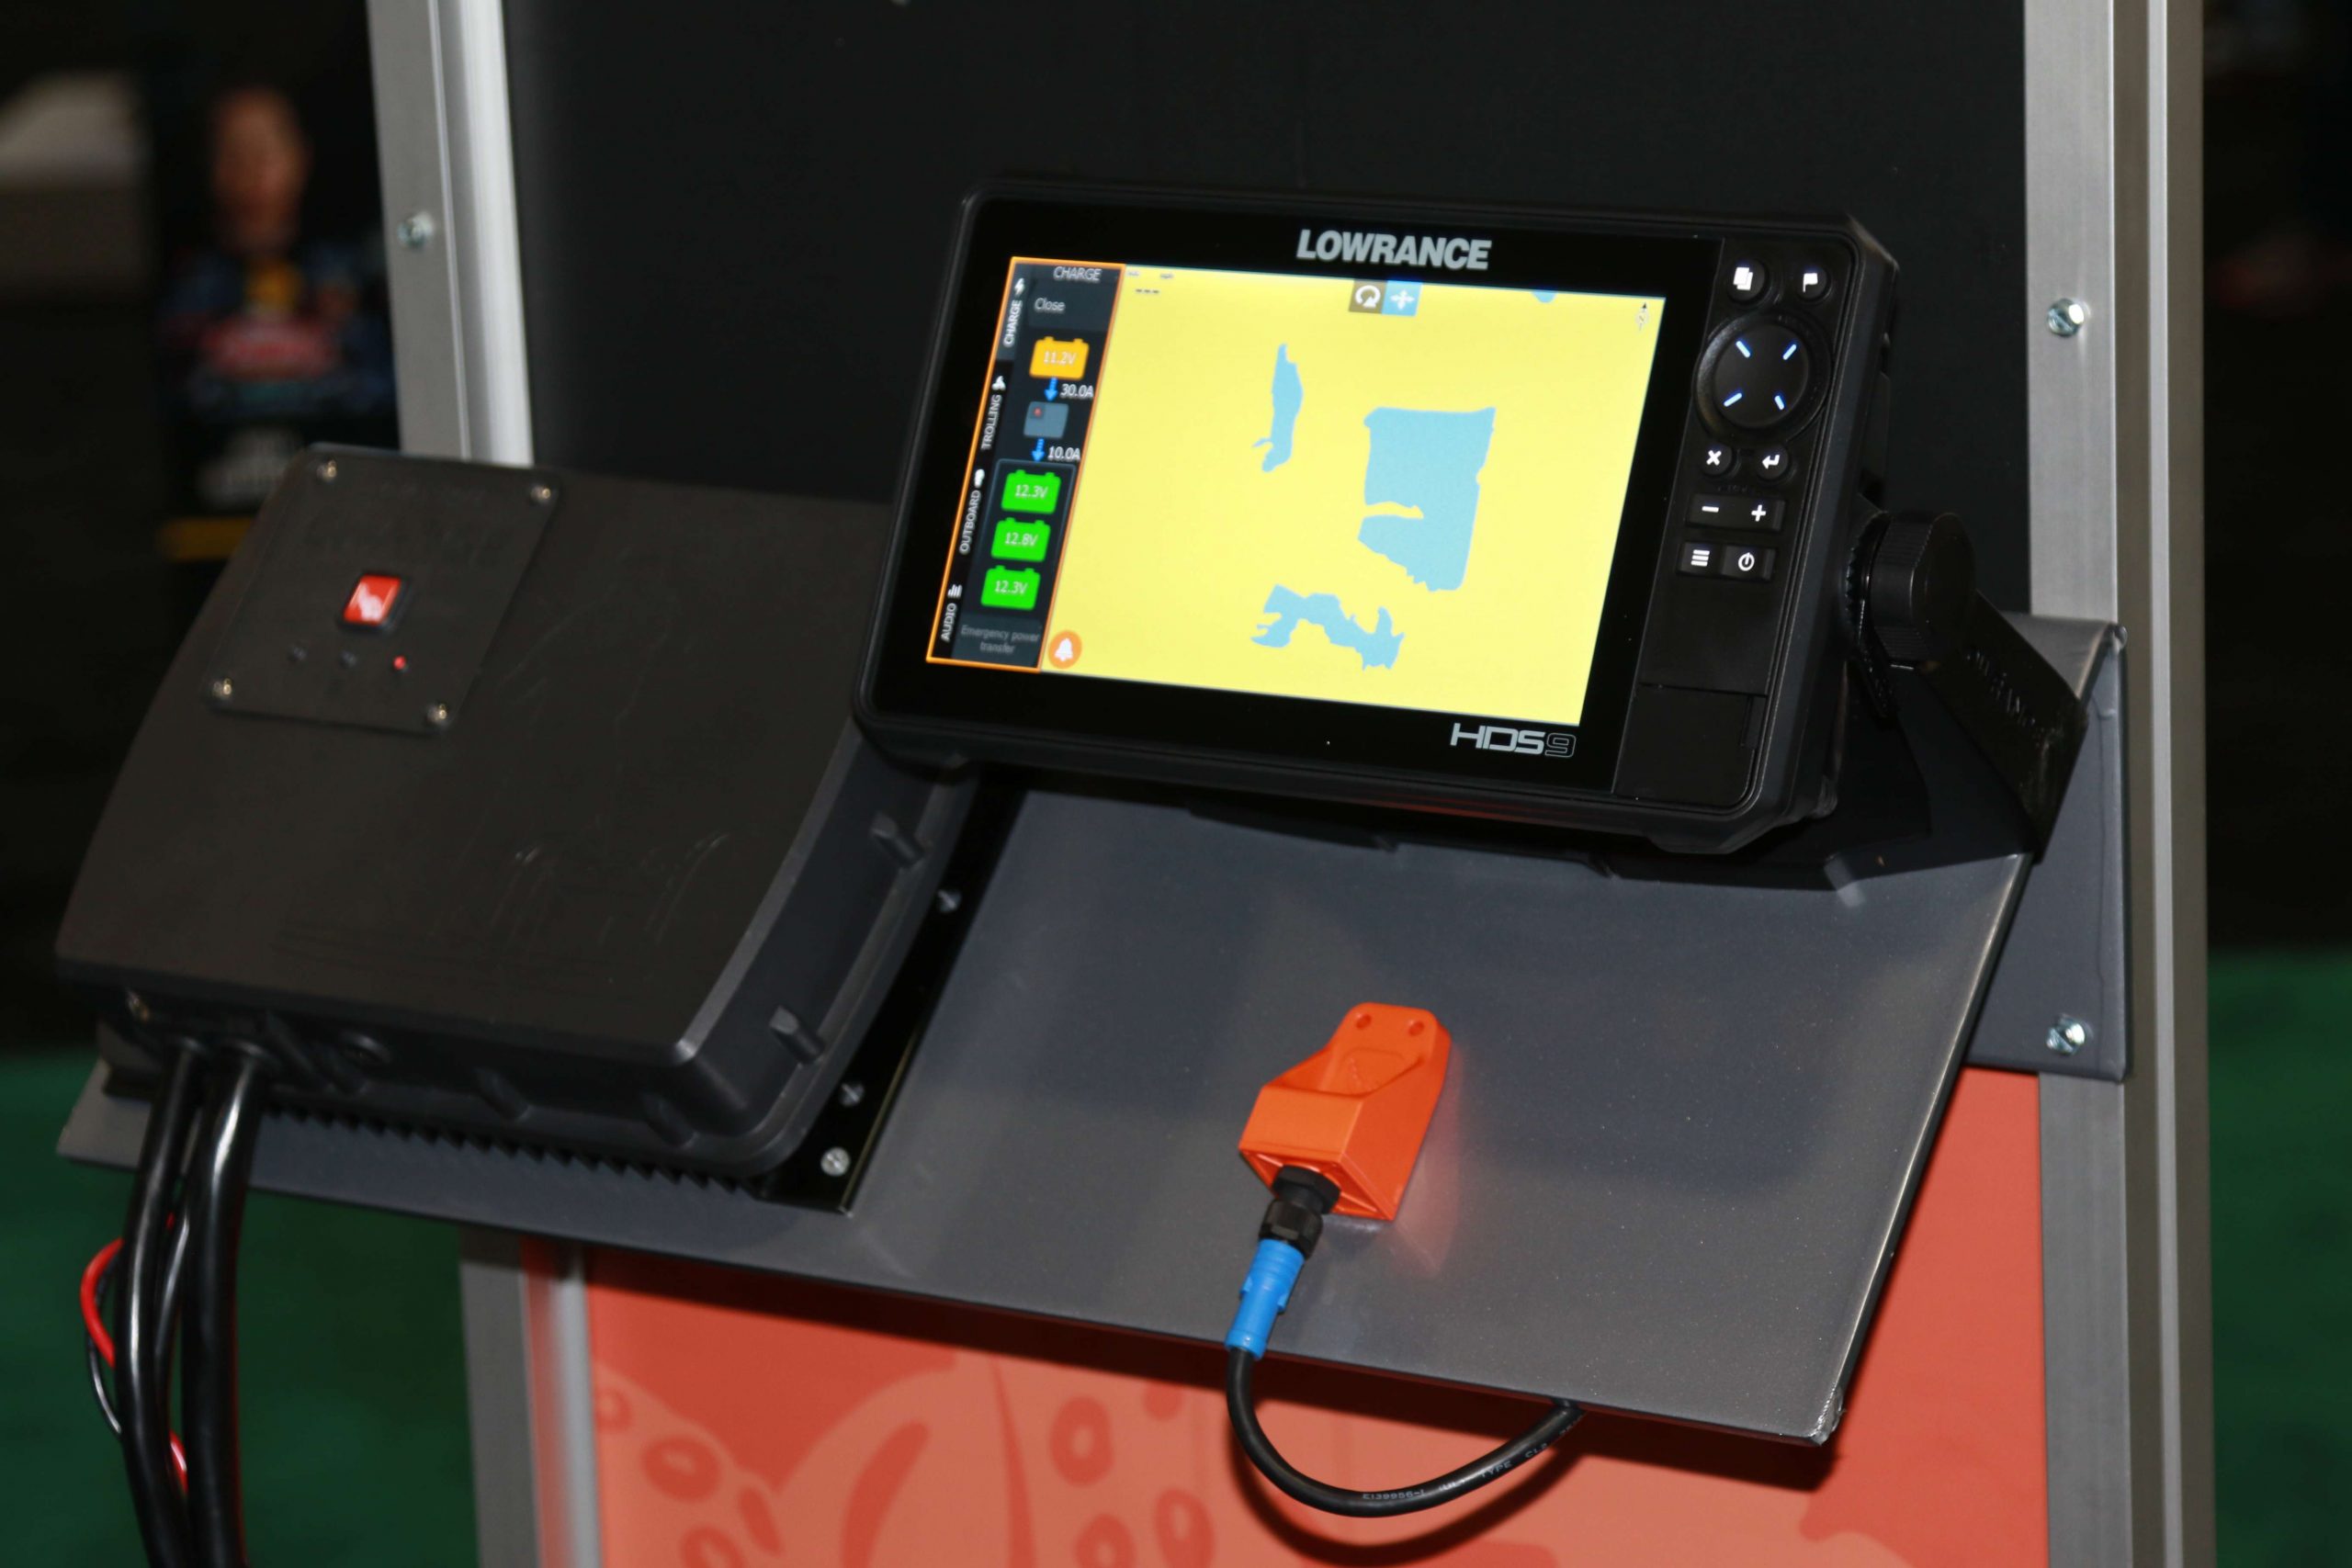 The new Power-Pole Gateway provides a wireless connection through which anglers can operate their various boat control elements.